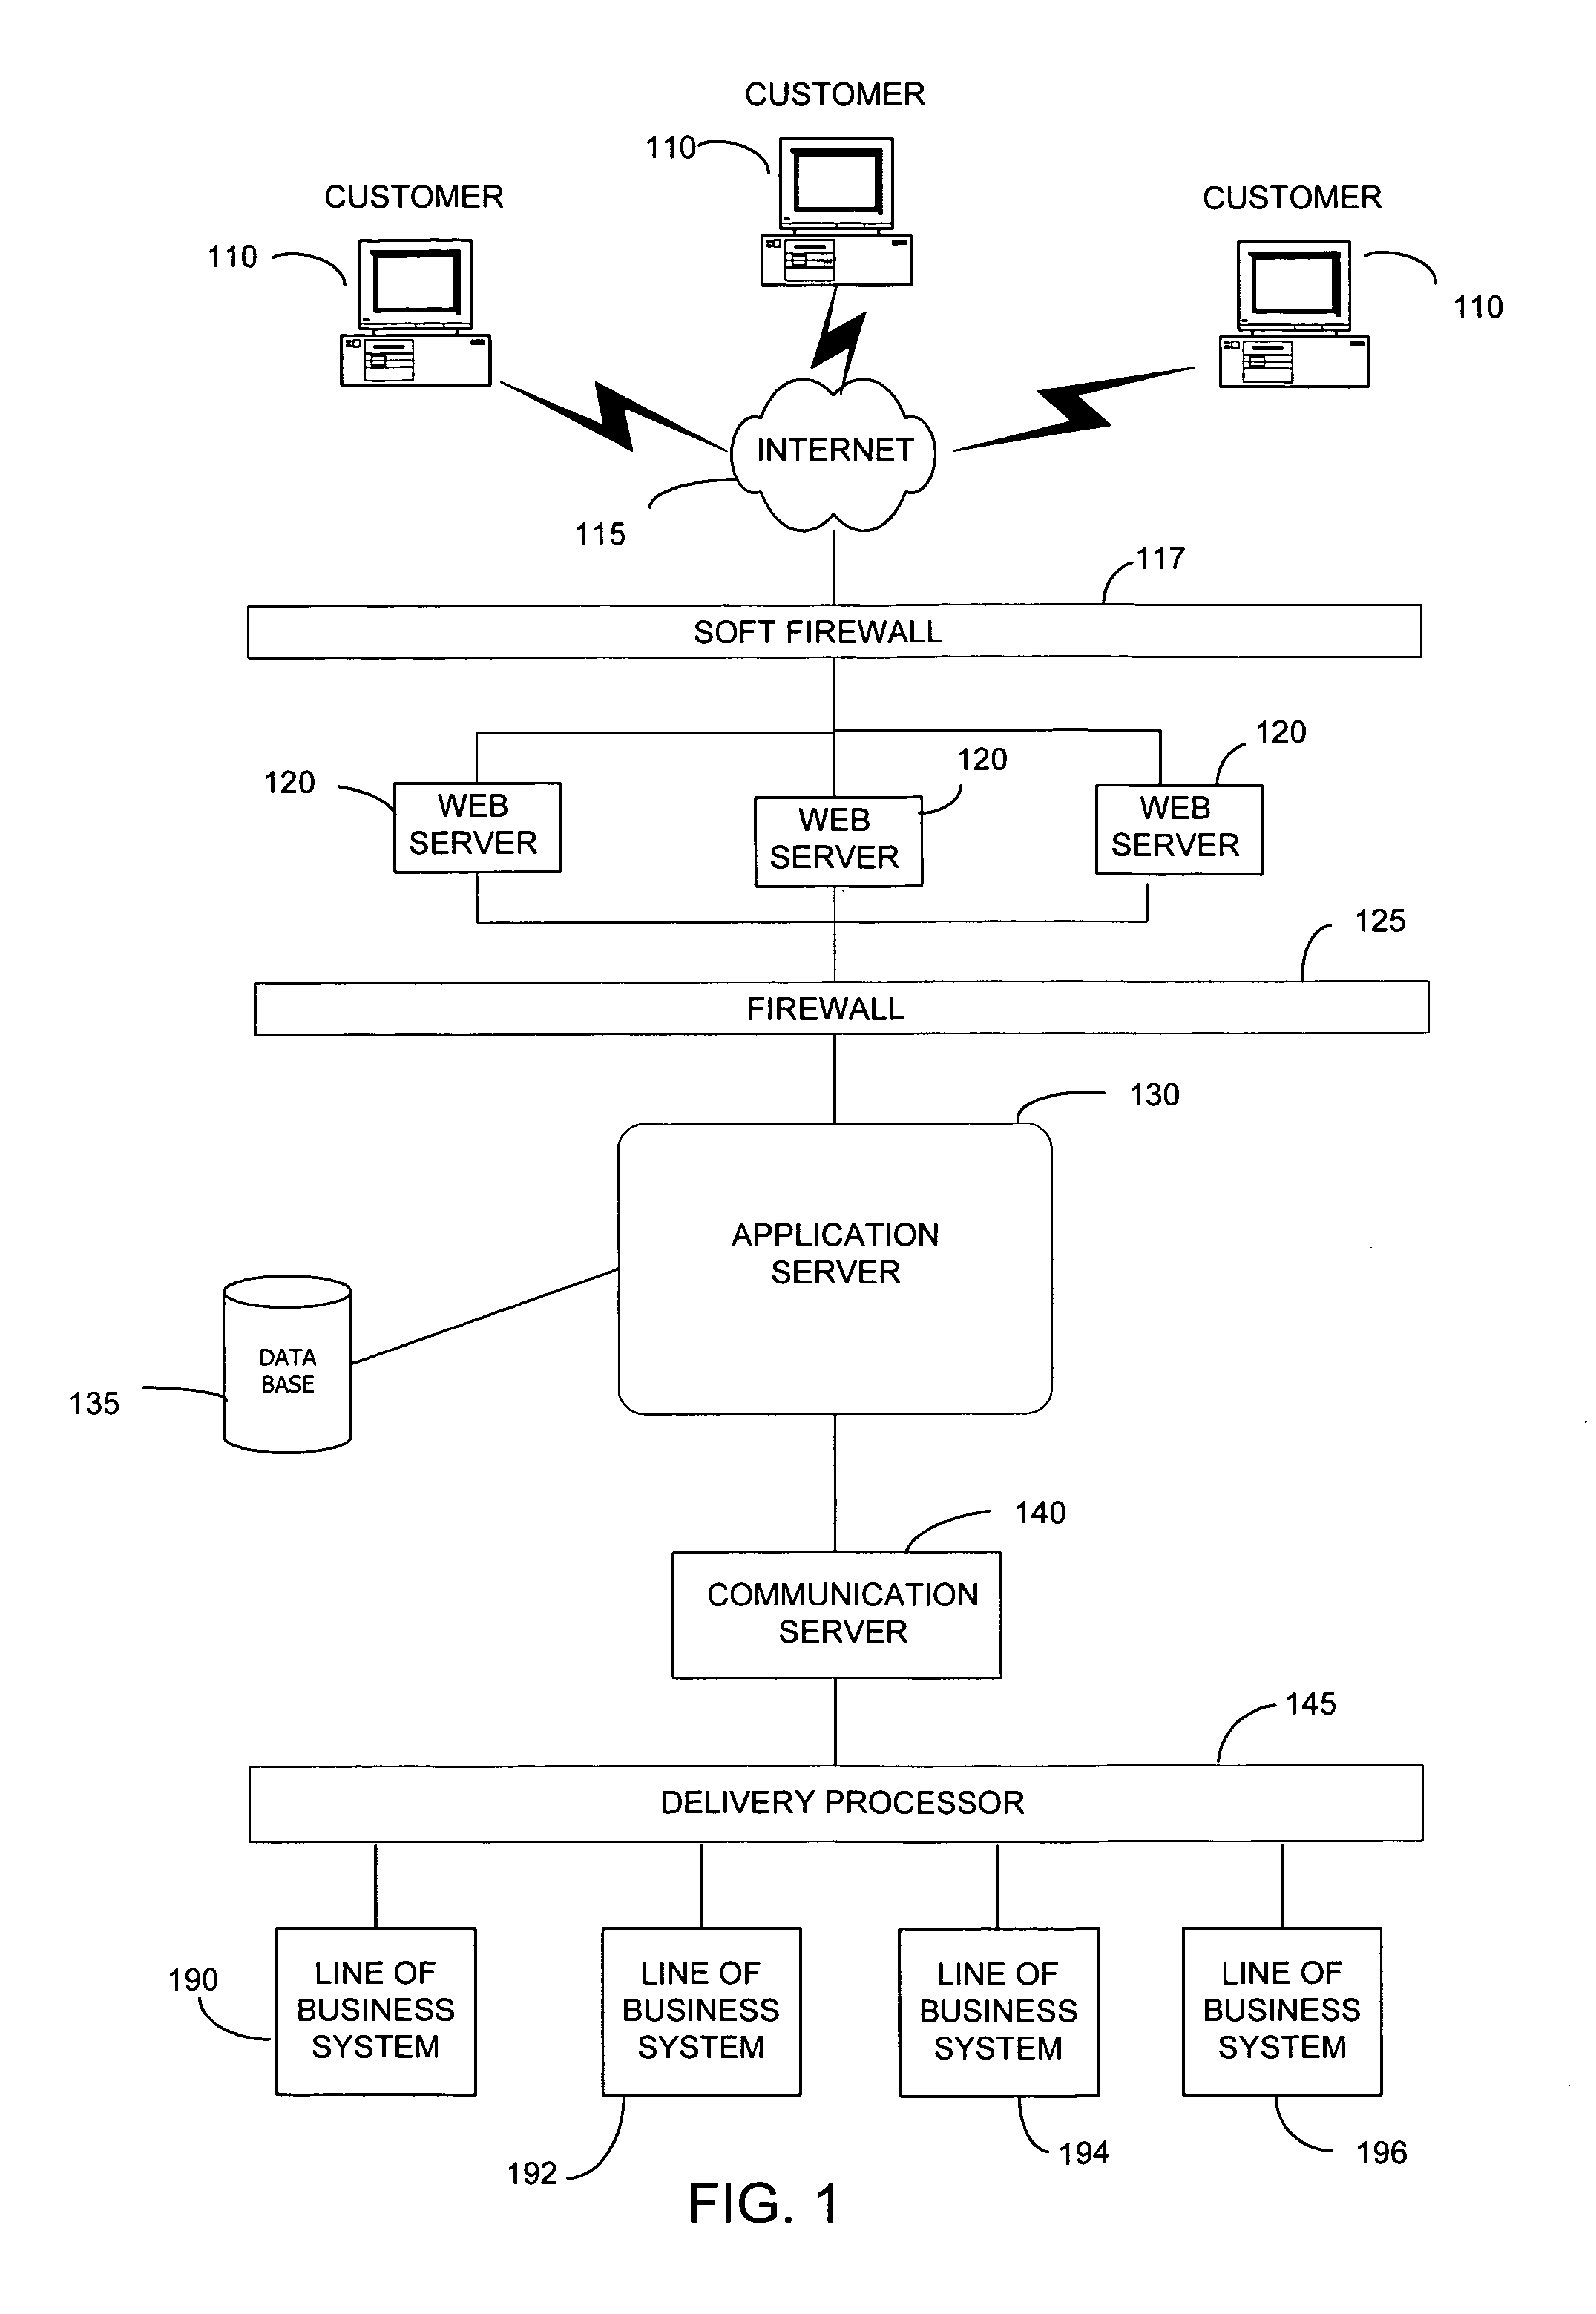 System and method for single sign on process for websites with multiple applications and services